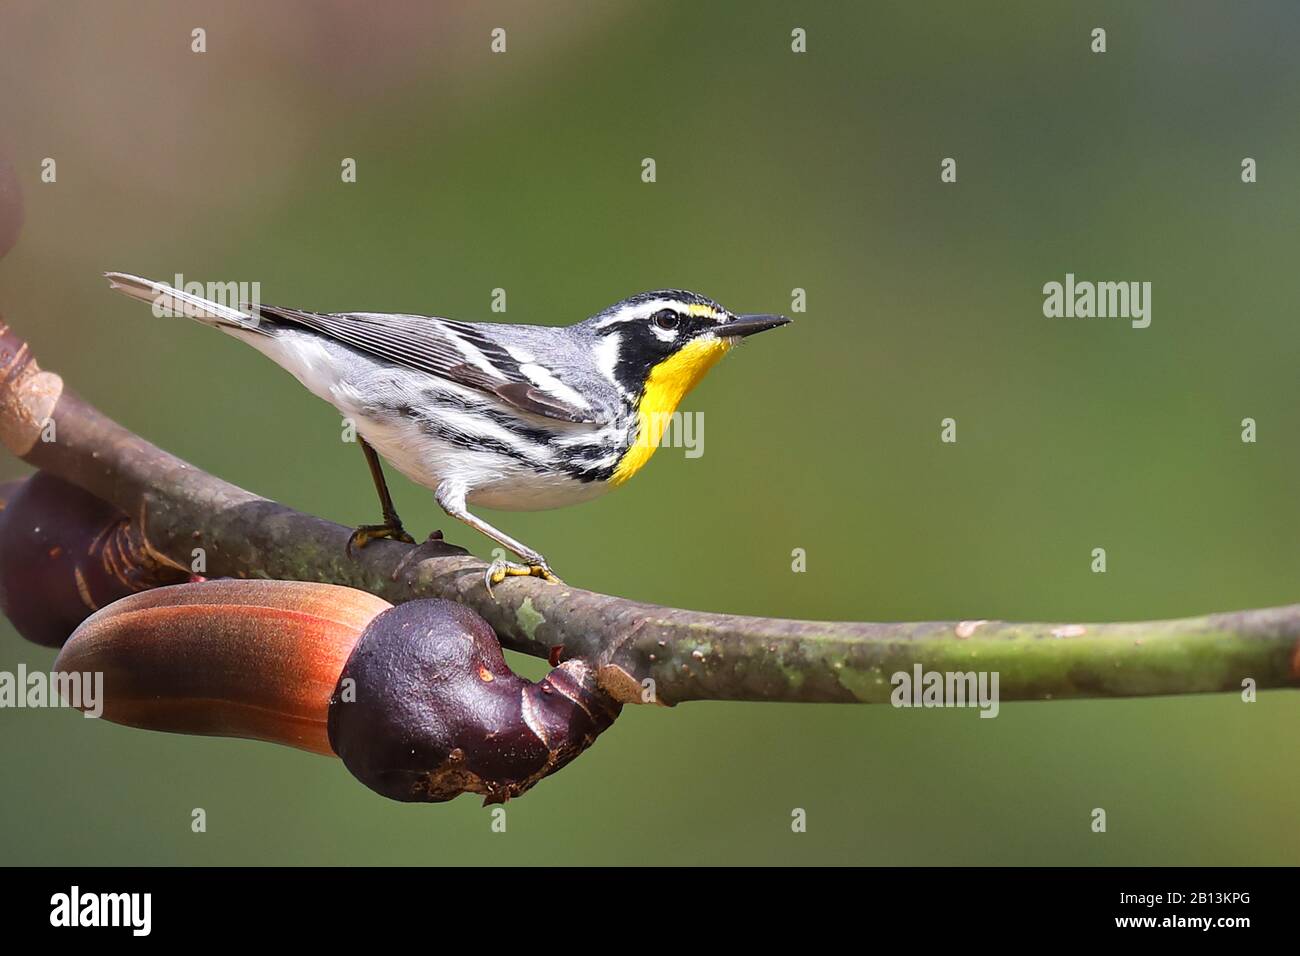 yellow-throated warbler (Setophaga dominica, Dendroica dominica), sits on a twig of Pseudobombax ellipticum, Cuba, Topes de Collantes Stock Photo